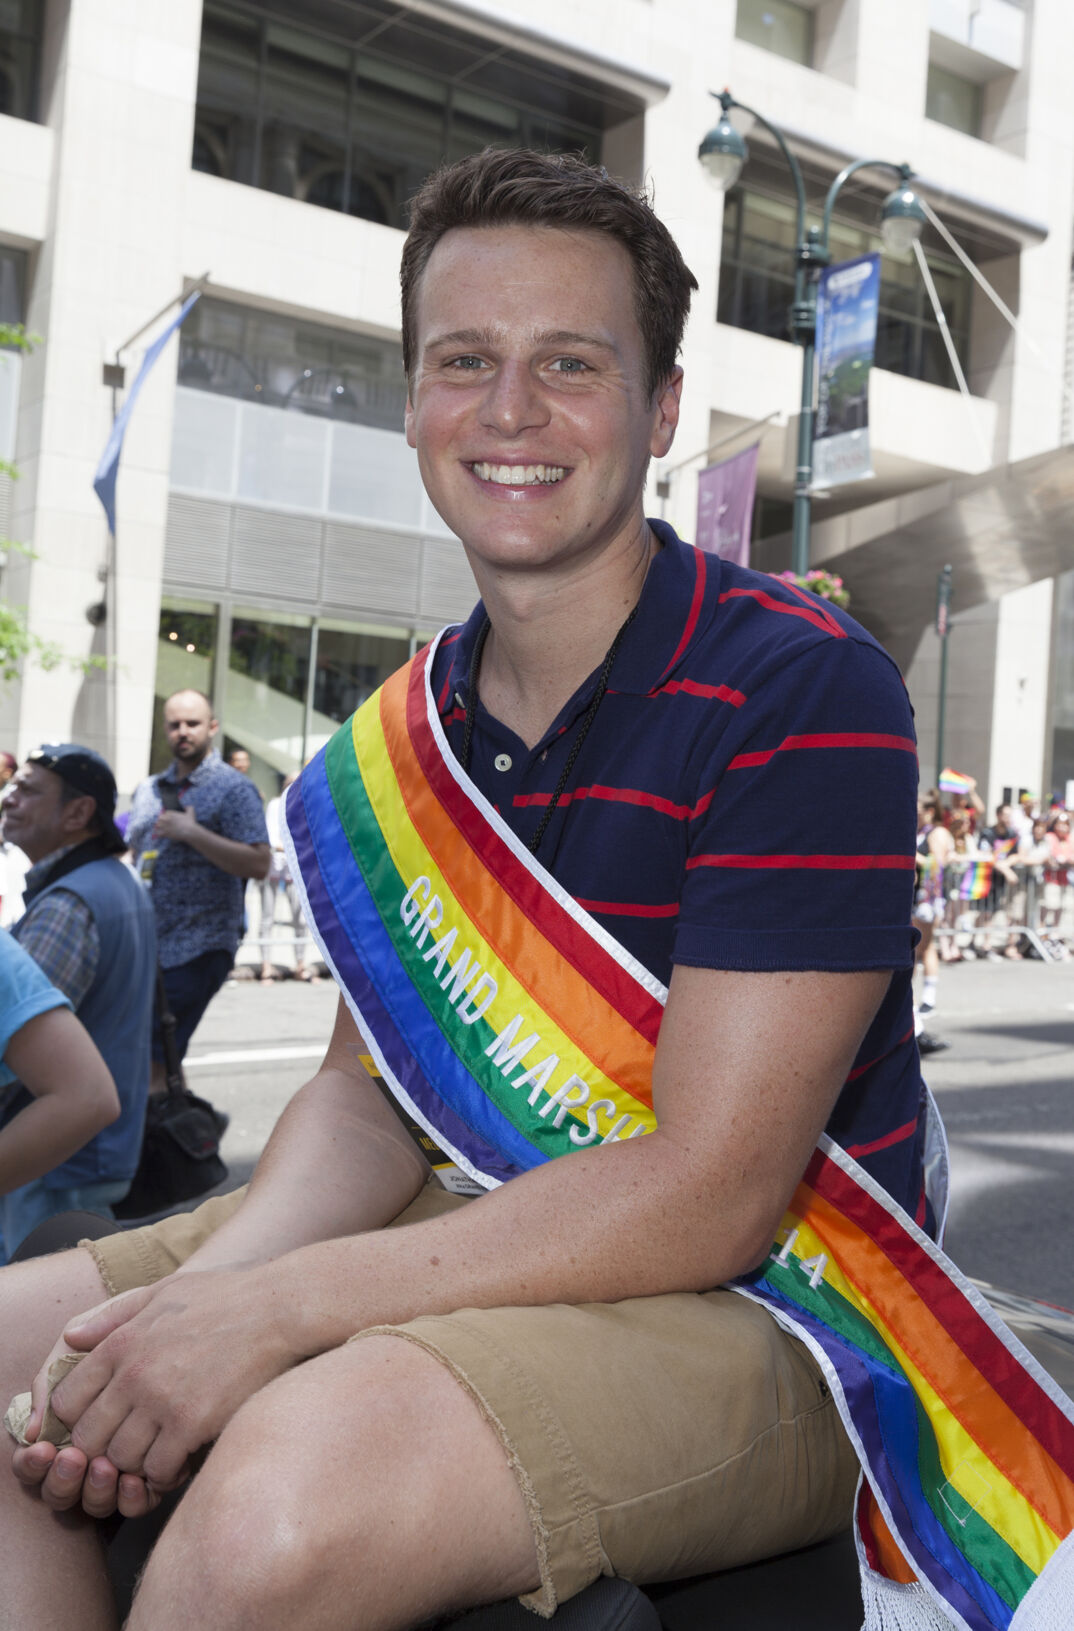 Jonathan Groff smiles while wearing a rainbow sash reading "Grand Marshal" outside in New York City.